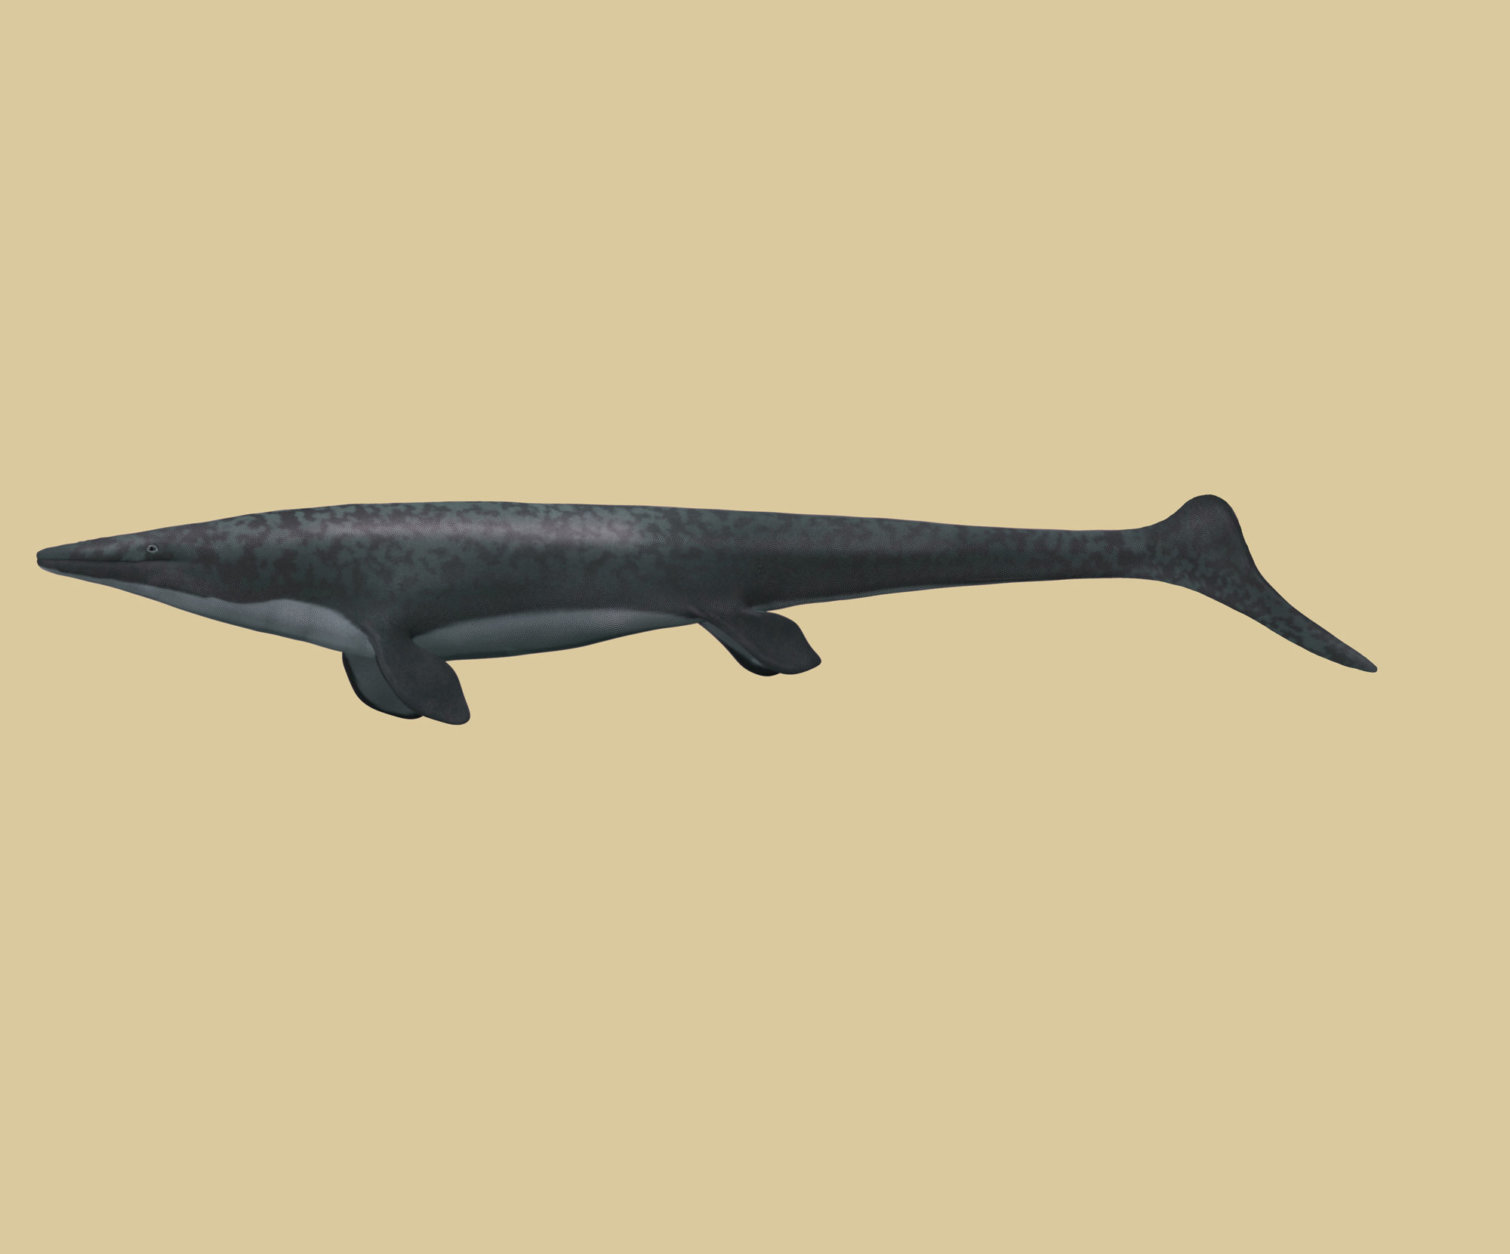 An artist’s rendering of what this mosasaur, Angolasaurus bocagei, might have looked like while it was alive. (Karen Carr Studios, Inc.)